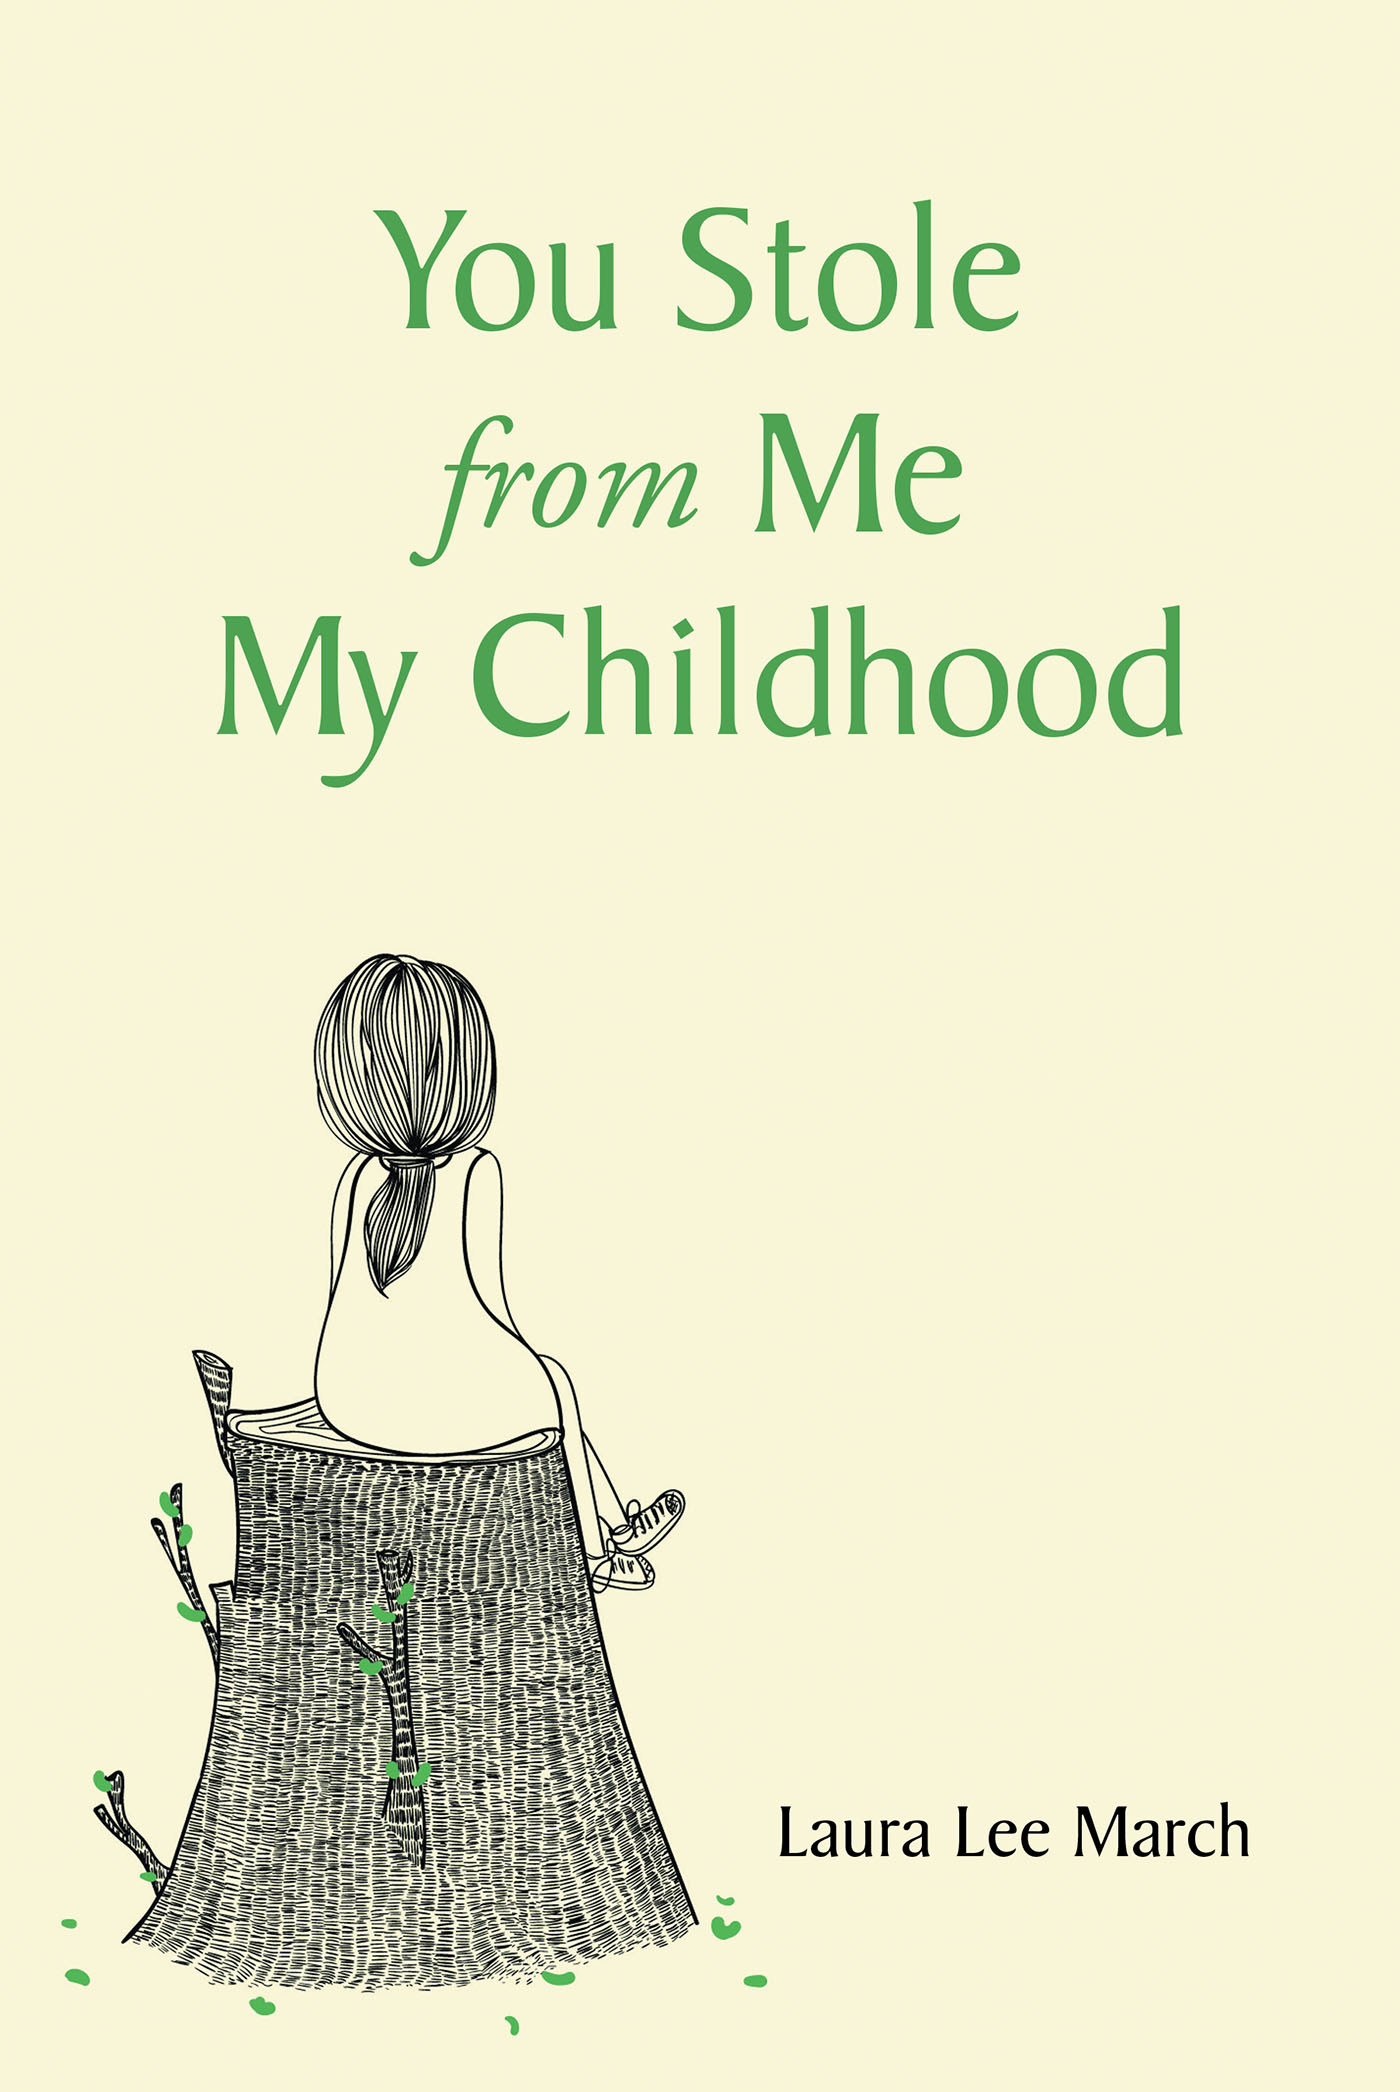 Laura Lee March’s Newly Released "You Stole from Me My Childhood" is a Potent Collection of Personal Reflections and Poetry